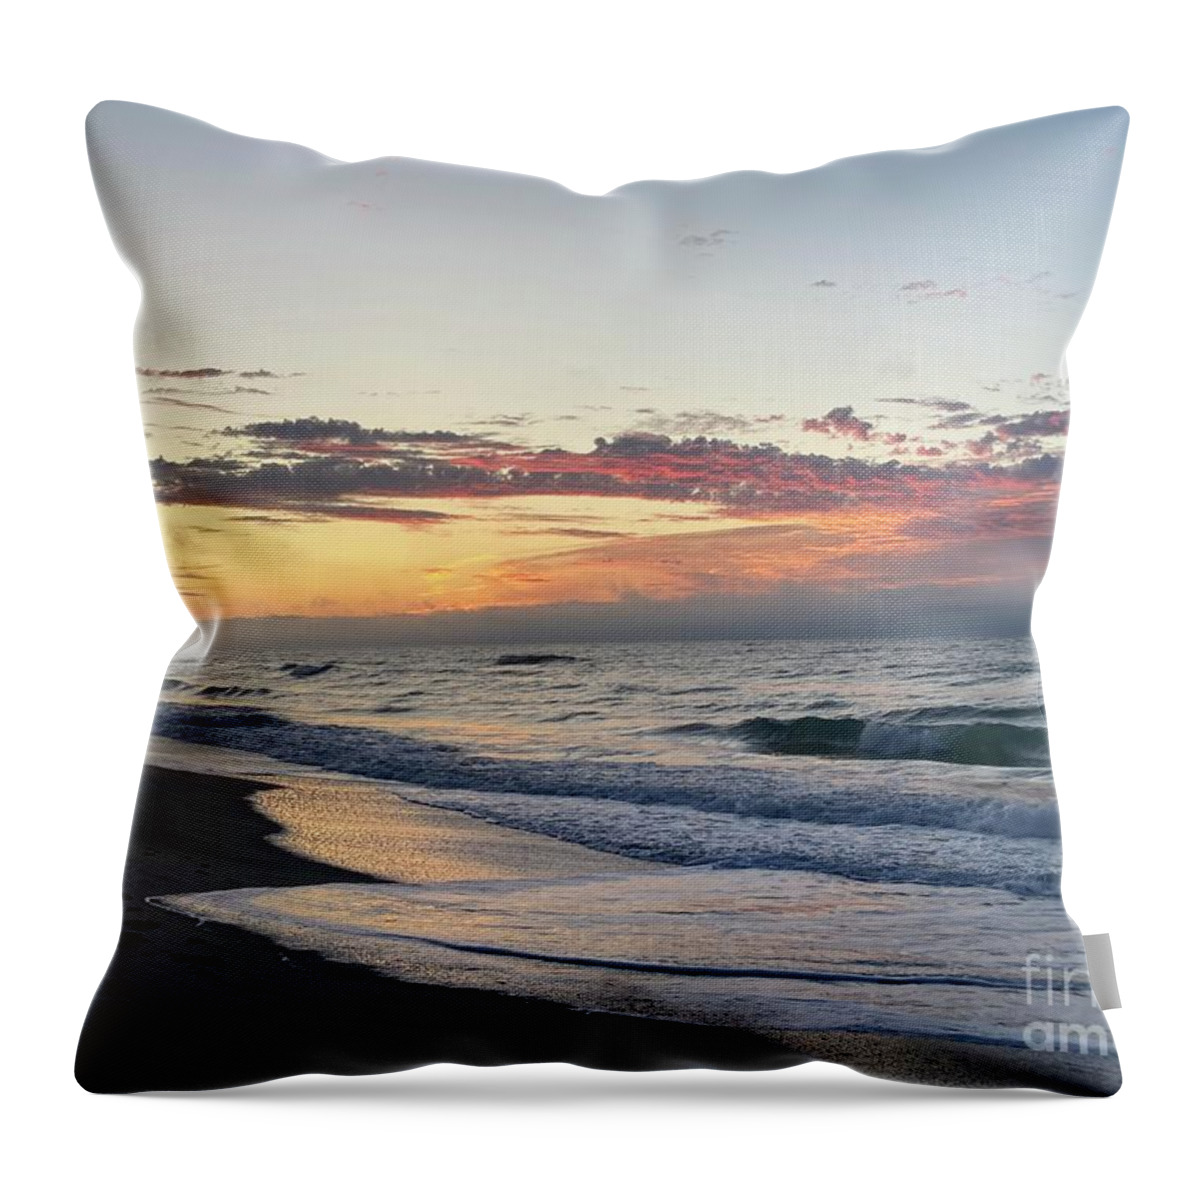  Throw Pillow featuring the photograph Beach10 by Mary Kobet